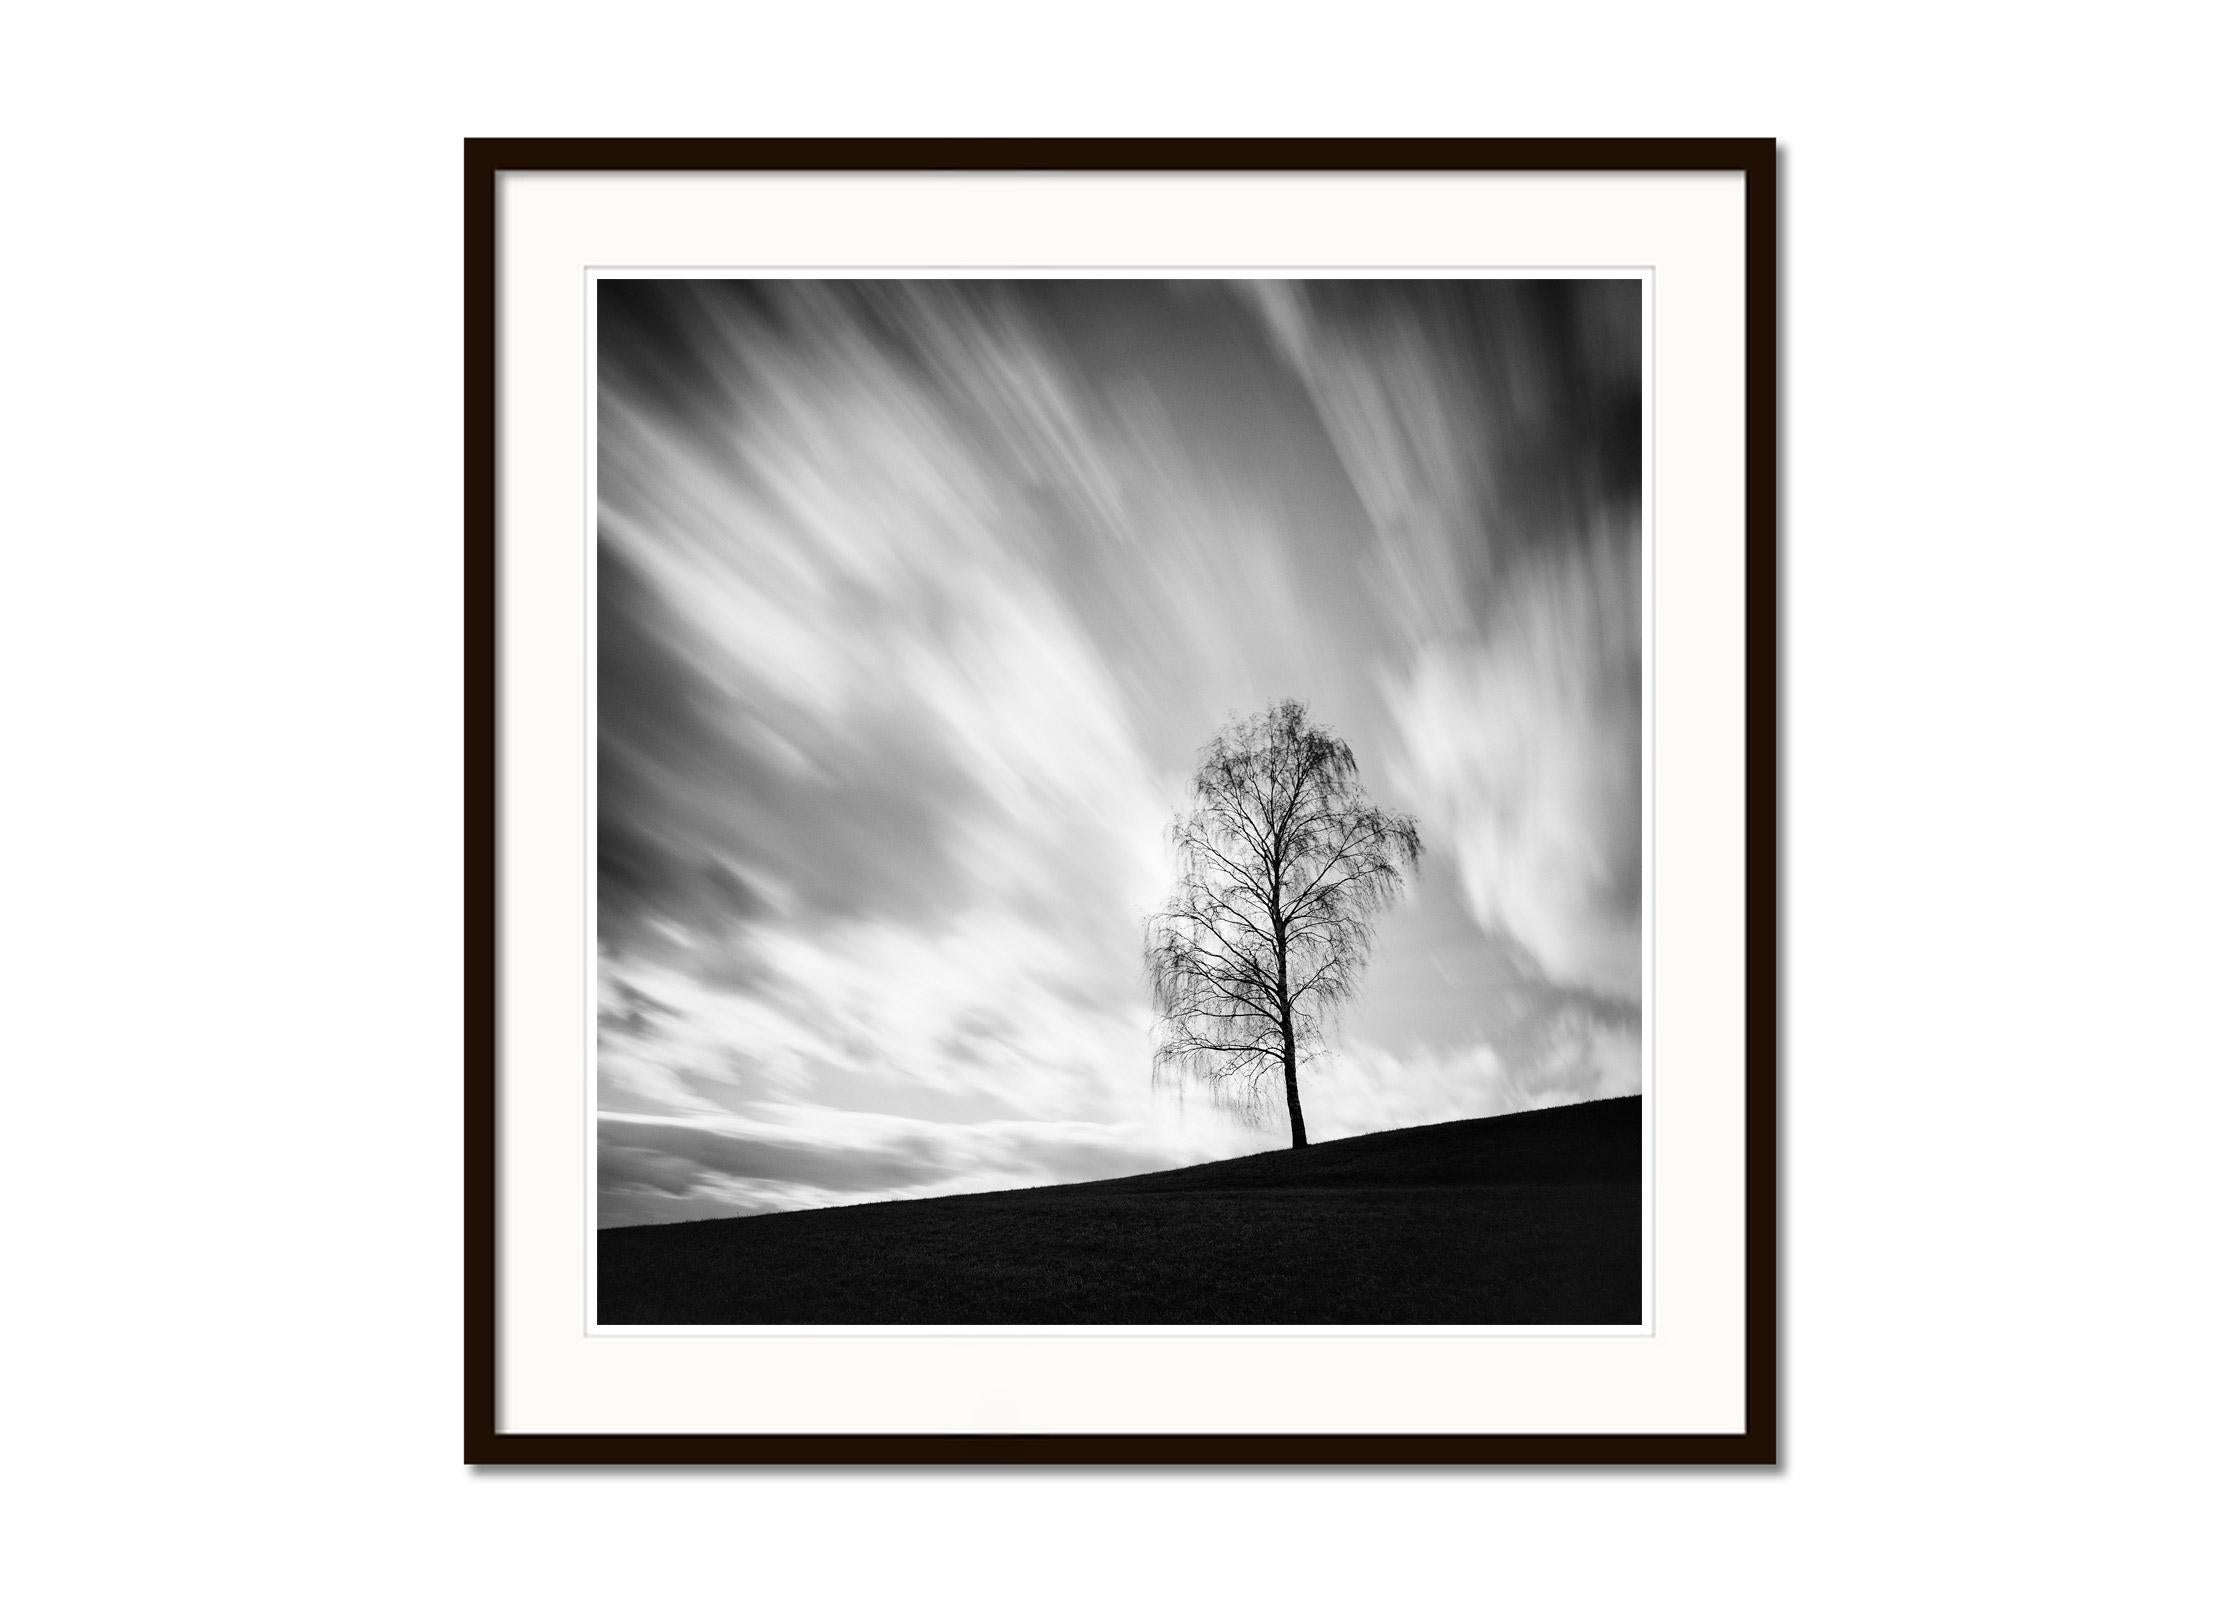 Black and White Fine Art Photography - Single tree on a hill with heavy clouds, long exposure. Archival pigment ink print, edition of 20. Signed, titled, dated and numbered by artist. Certificate of authenticity included. Printed with 4cm white